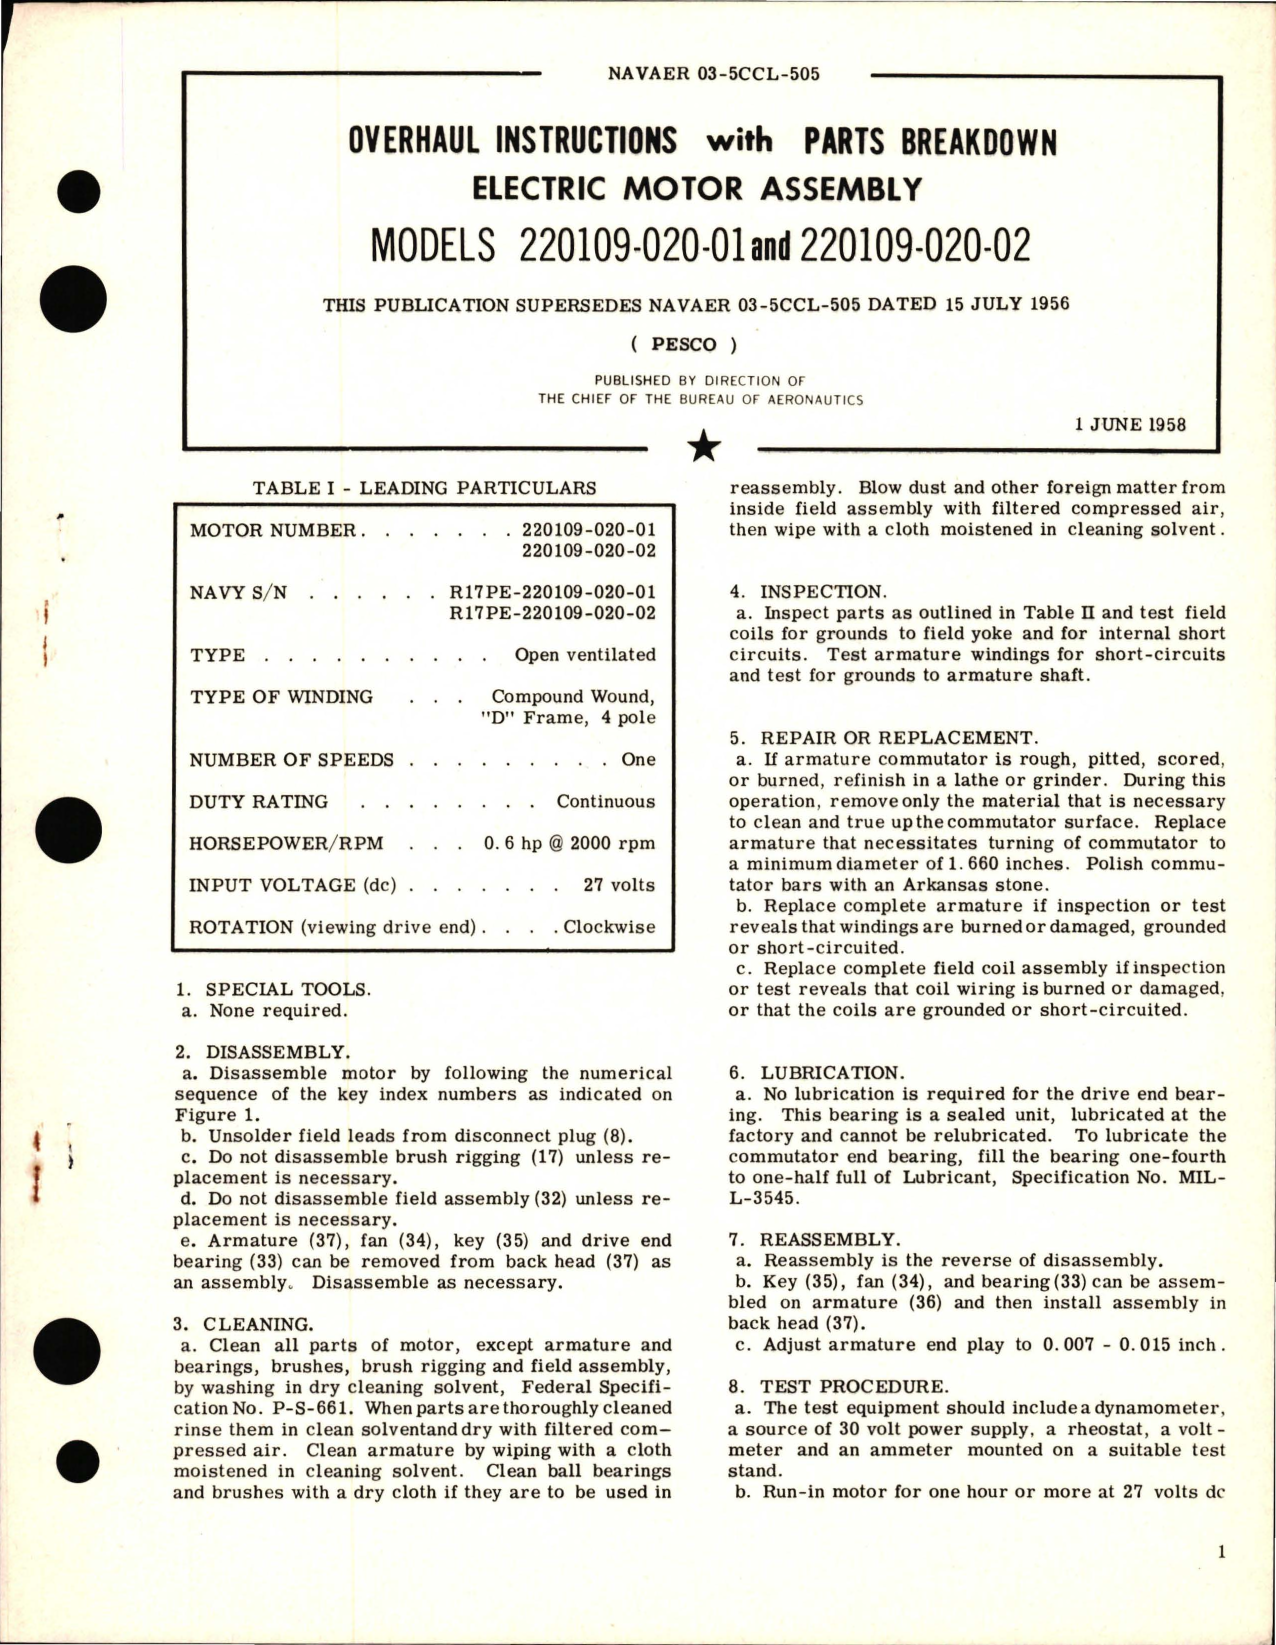 Sample page 1 from AirCorps Library document: Overhaul Instructions with Parts Breakdown for Electric Motor Assembly - Models 220109-020-01 and 220109-020-02 